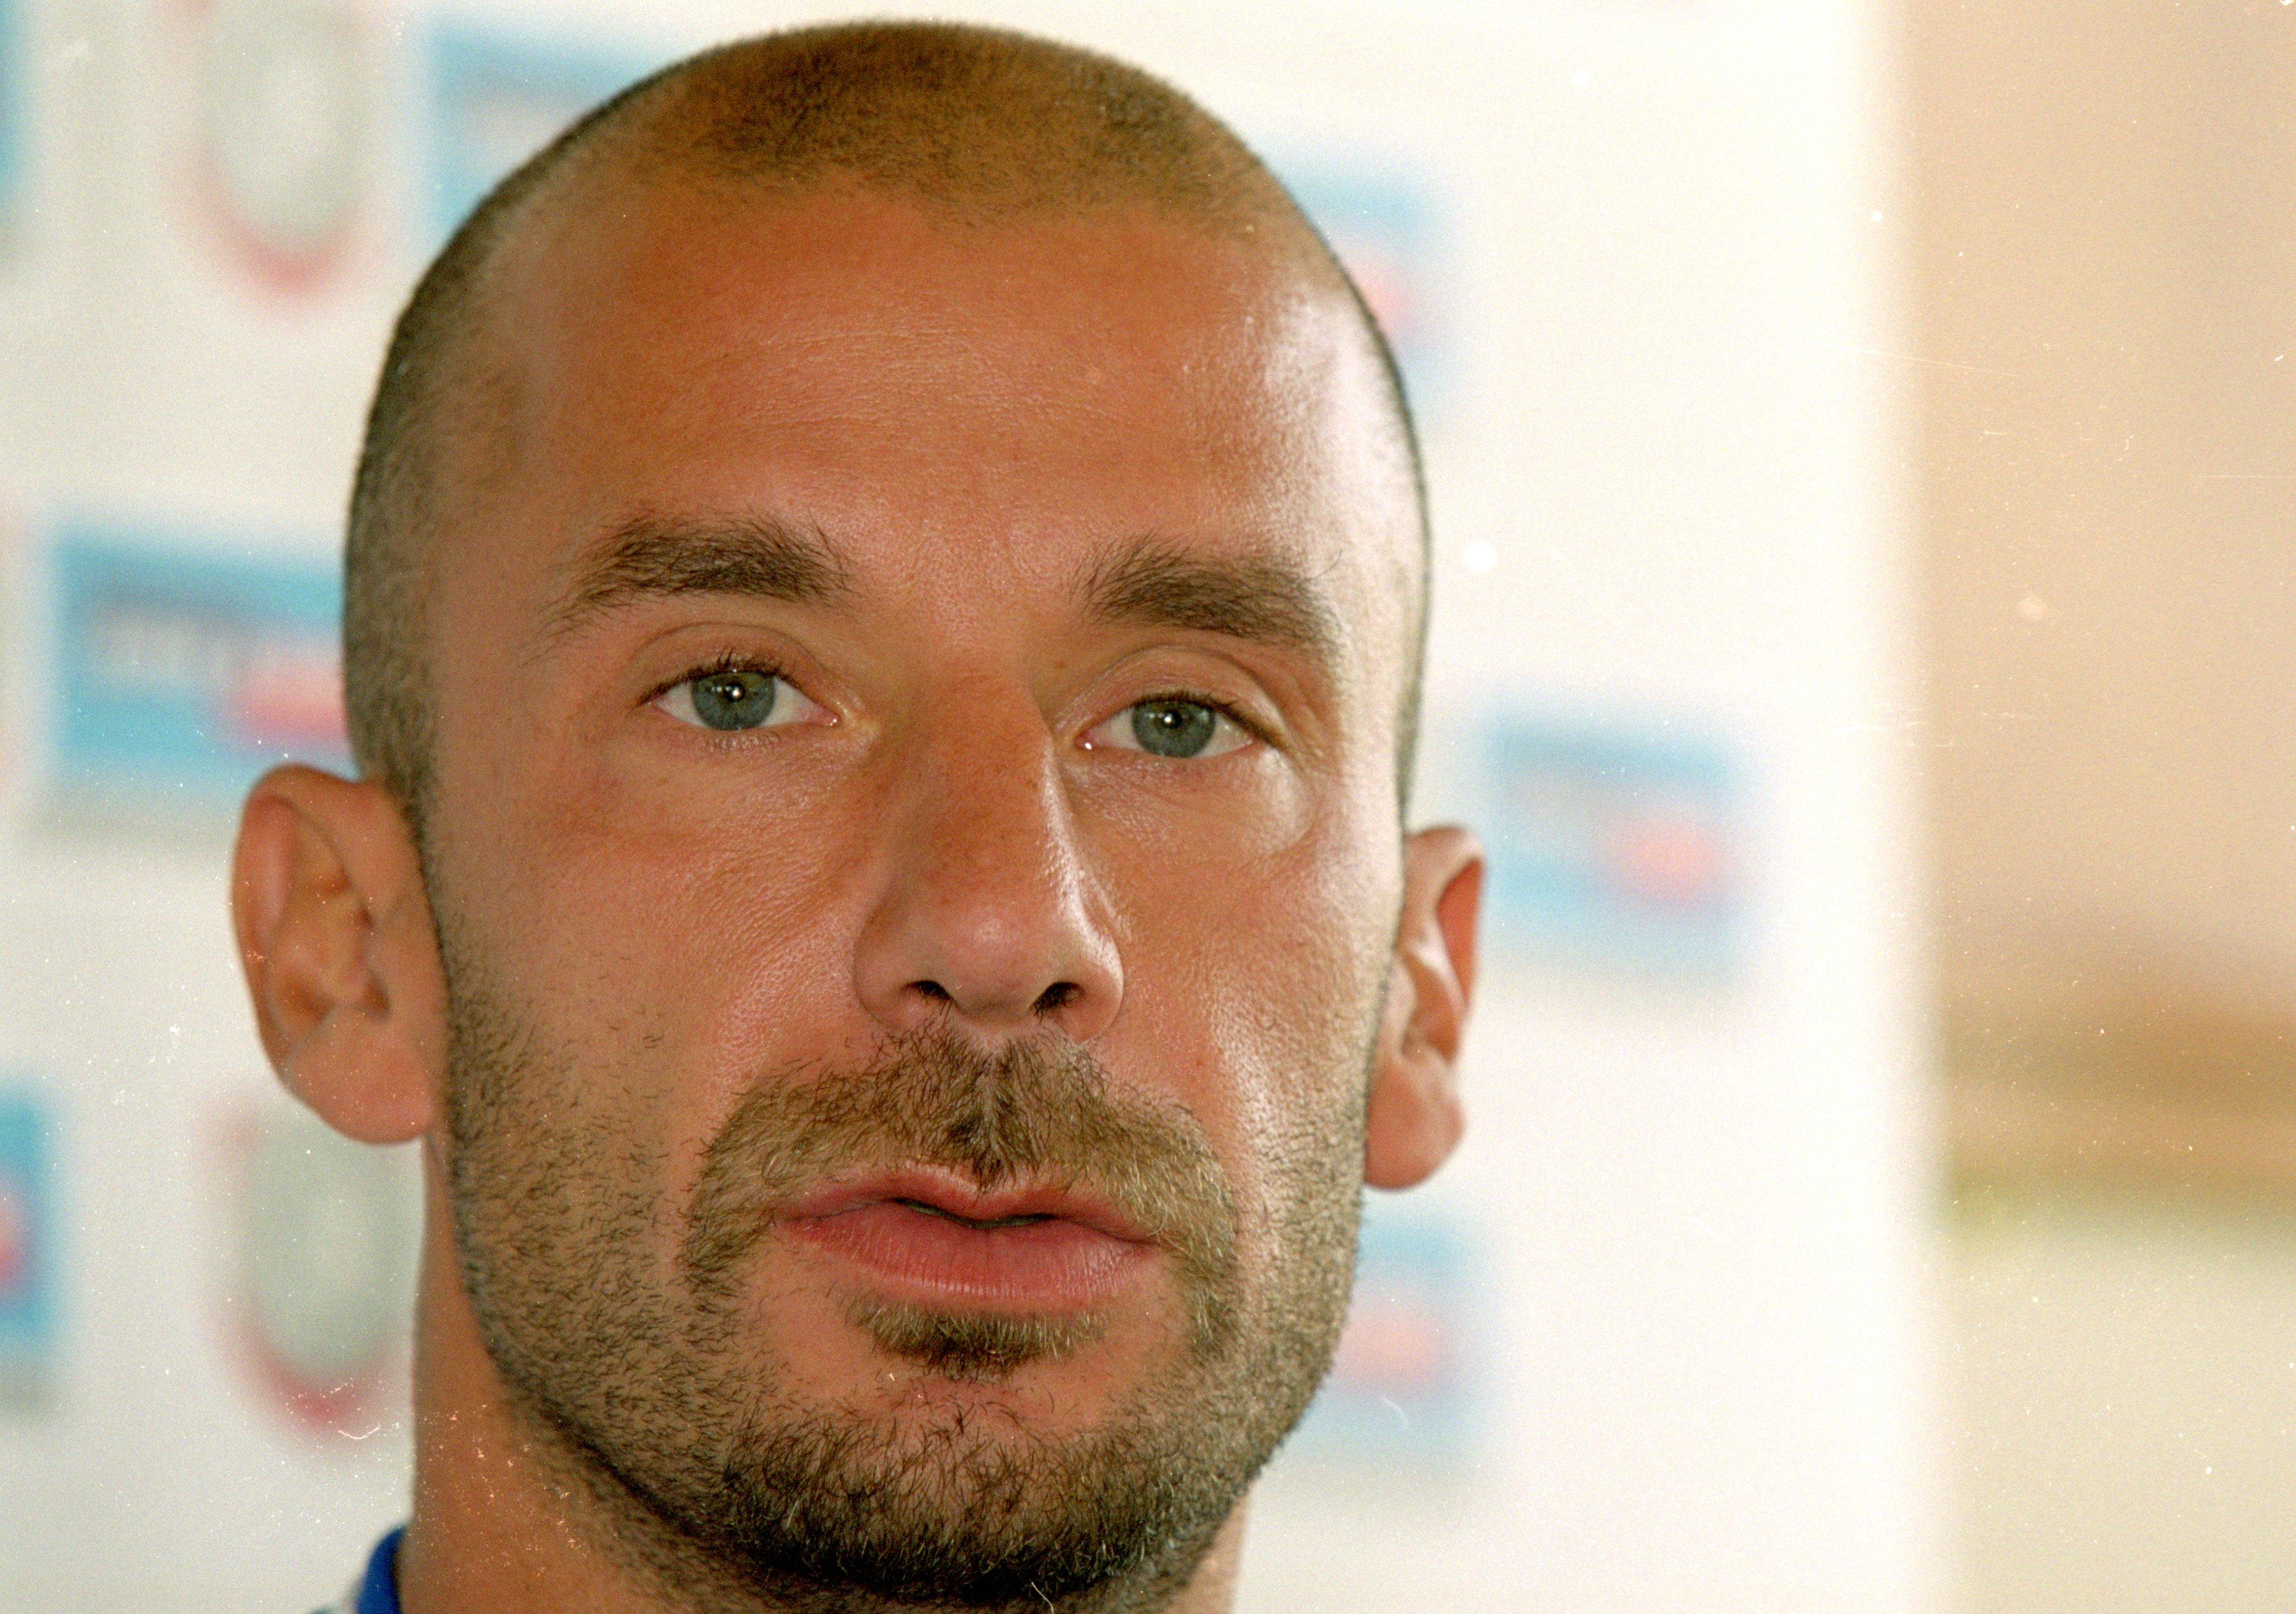 Gianluca Vialli’s Advisory Firm Assisting BC Partners During Inter Talks With Suning, Italian Media Reveal